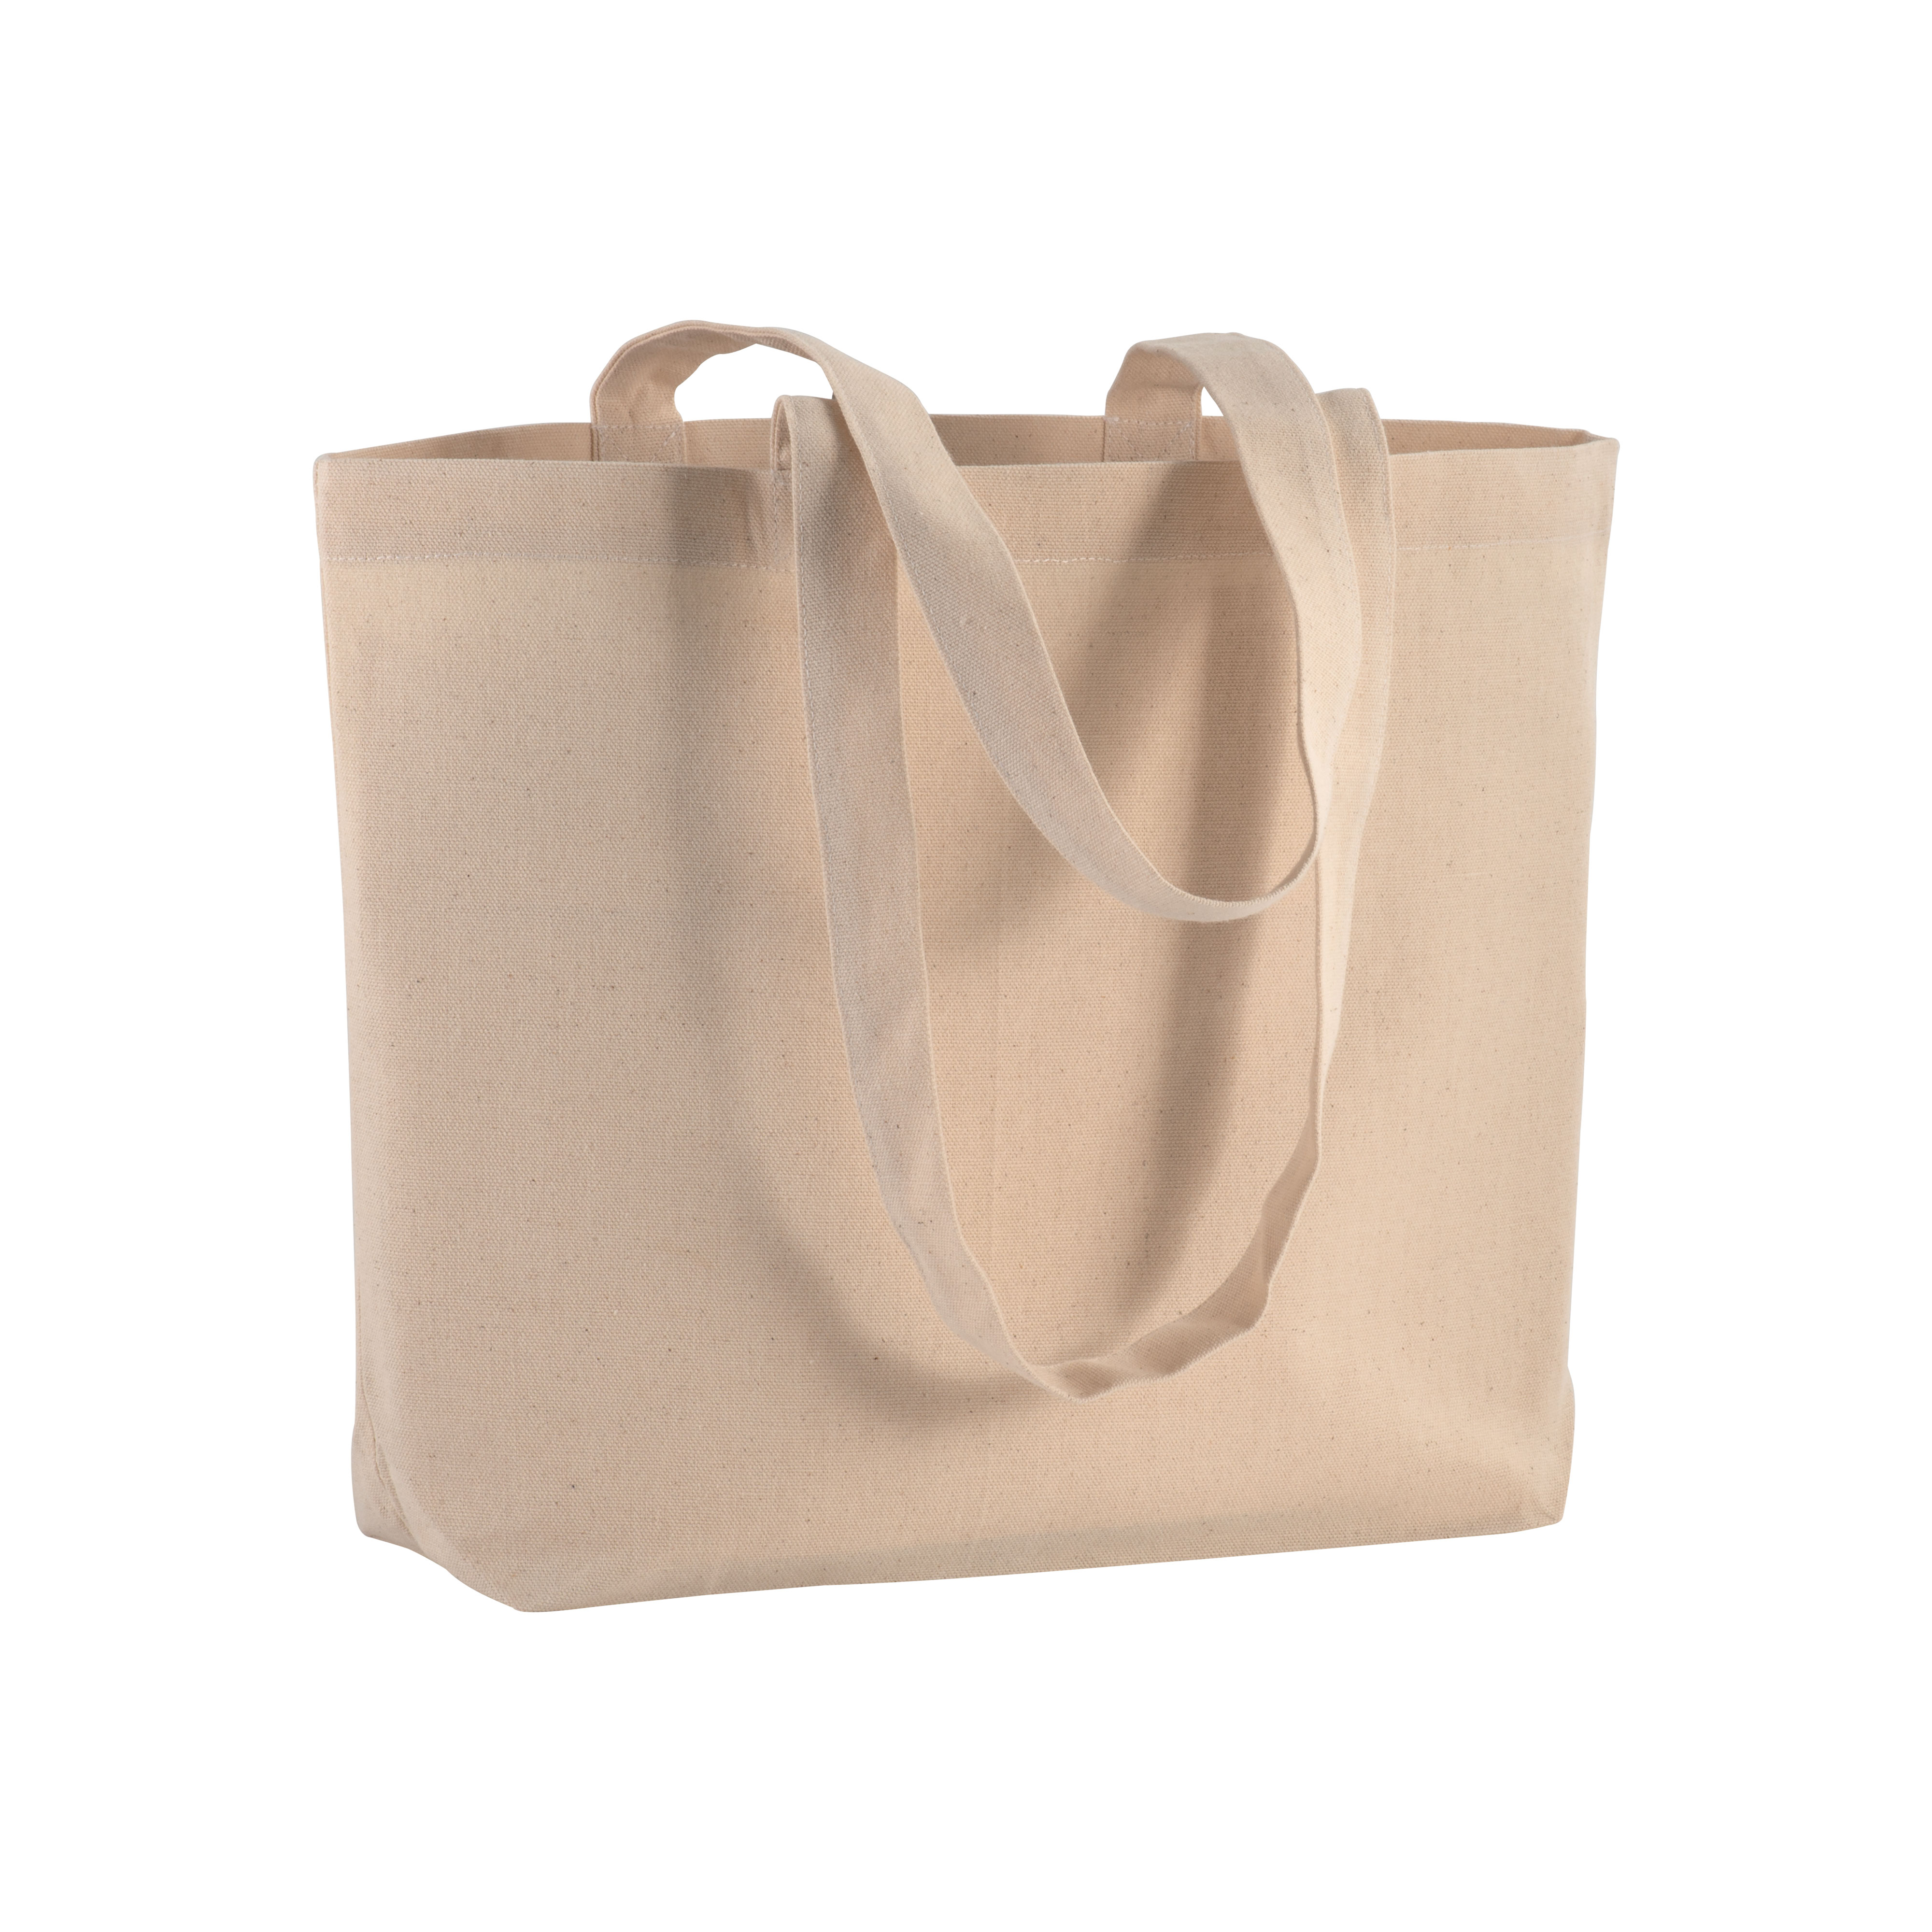 120 g/m2 cotton shopping bag, long handles and bottom gusset | SIPEC